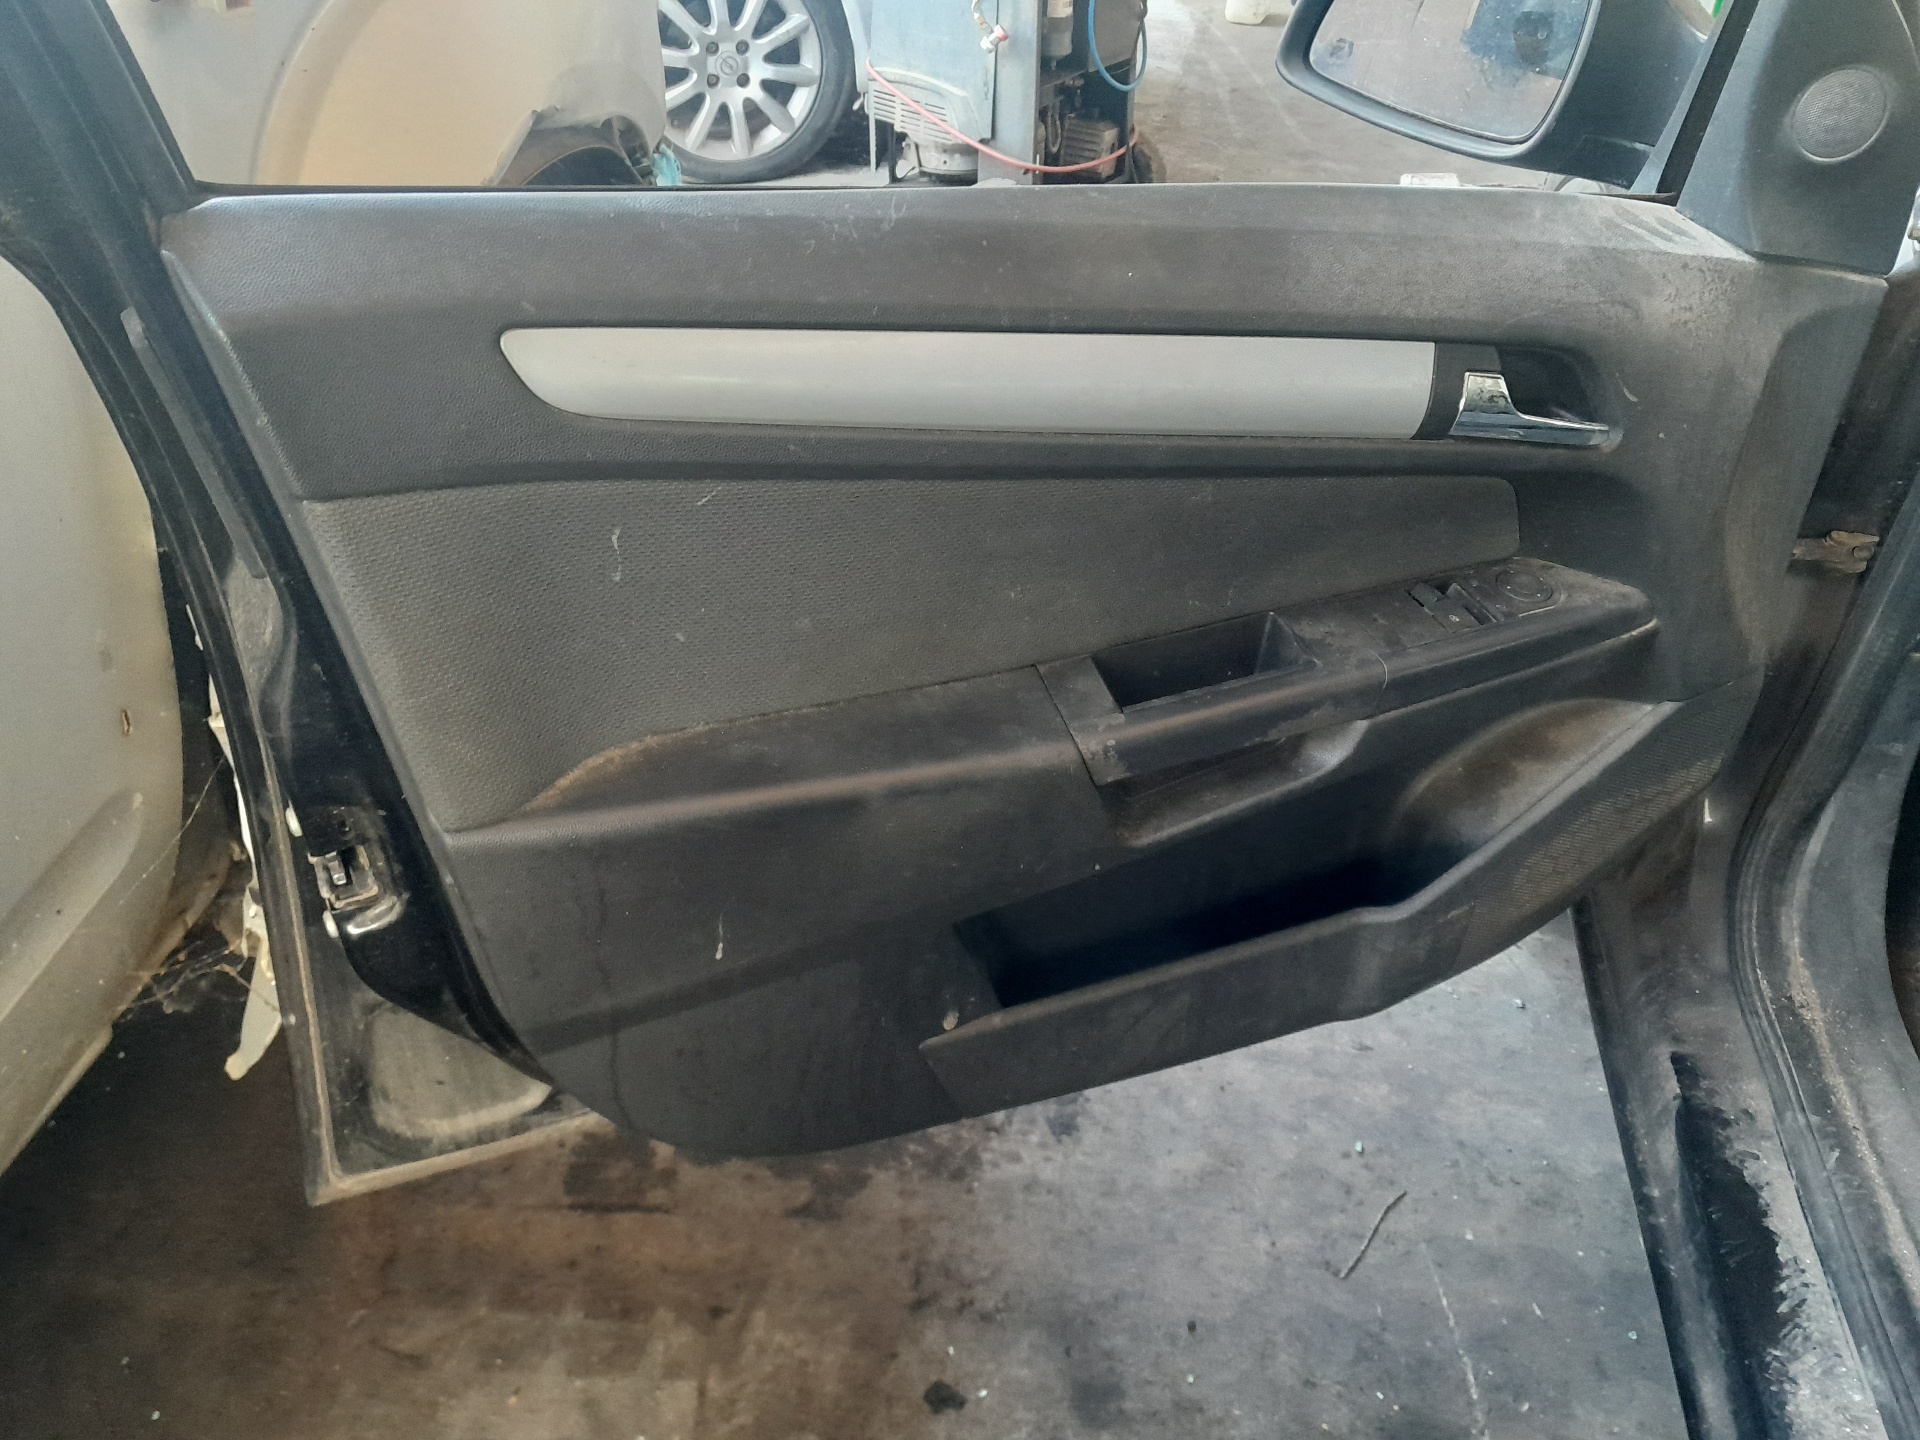 MG Astra J (2009-2020) Other Interior Parts 24463524 25008734